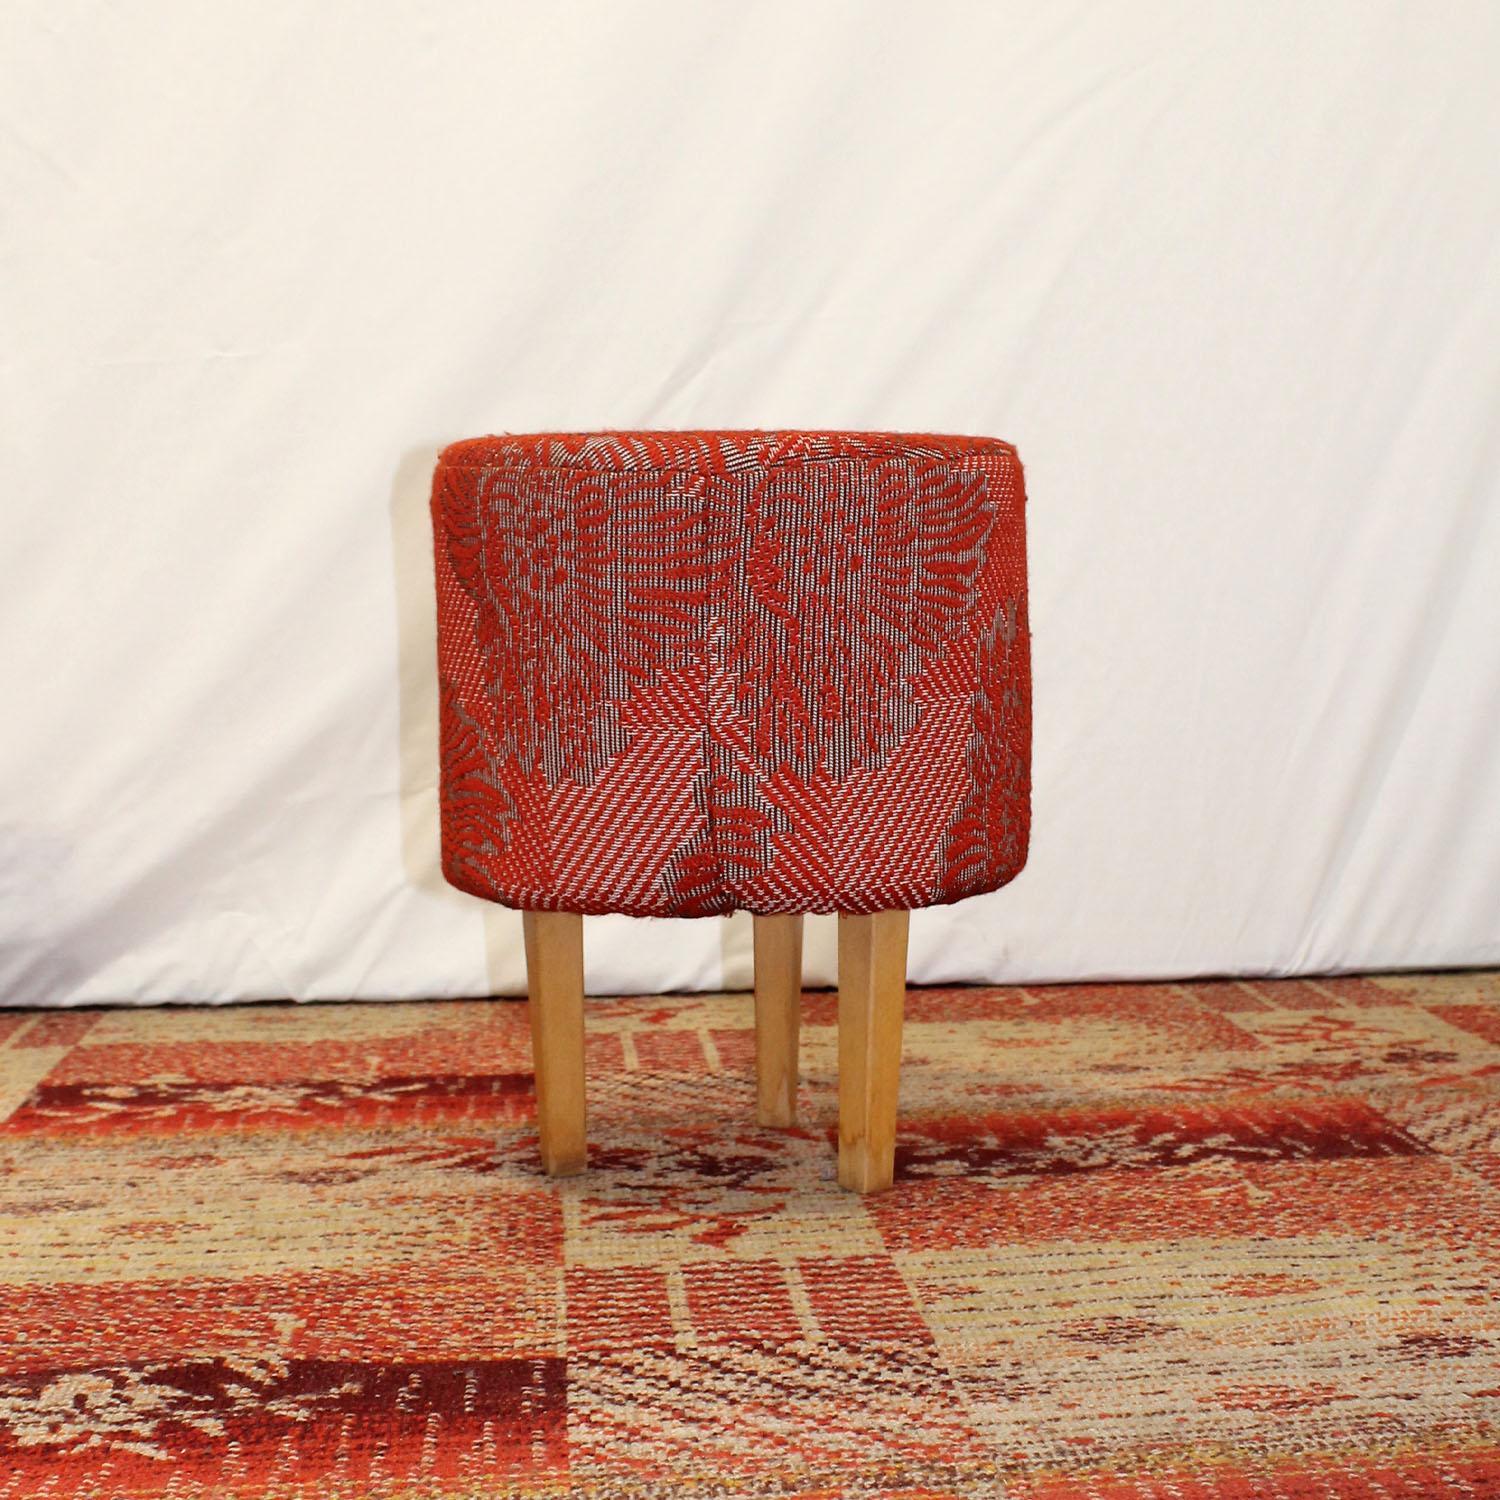 This pouffe- footstool was made in the former Czechoslovakia in the 1970s.
A very comfortable retro chic. It´s made of beech wood and fabric. 
In good Vintage condition, showing slight signs of age and using.

Dimensions: 34 x 43 x 34 cm (Width